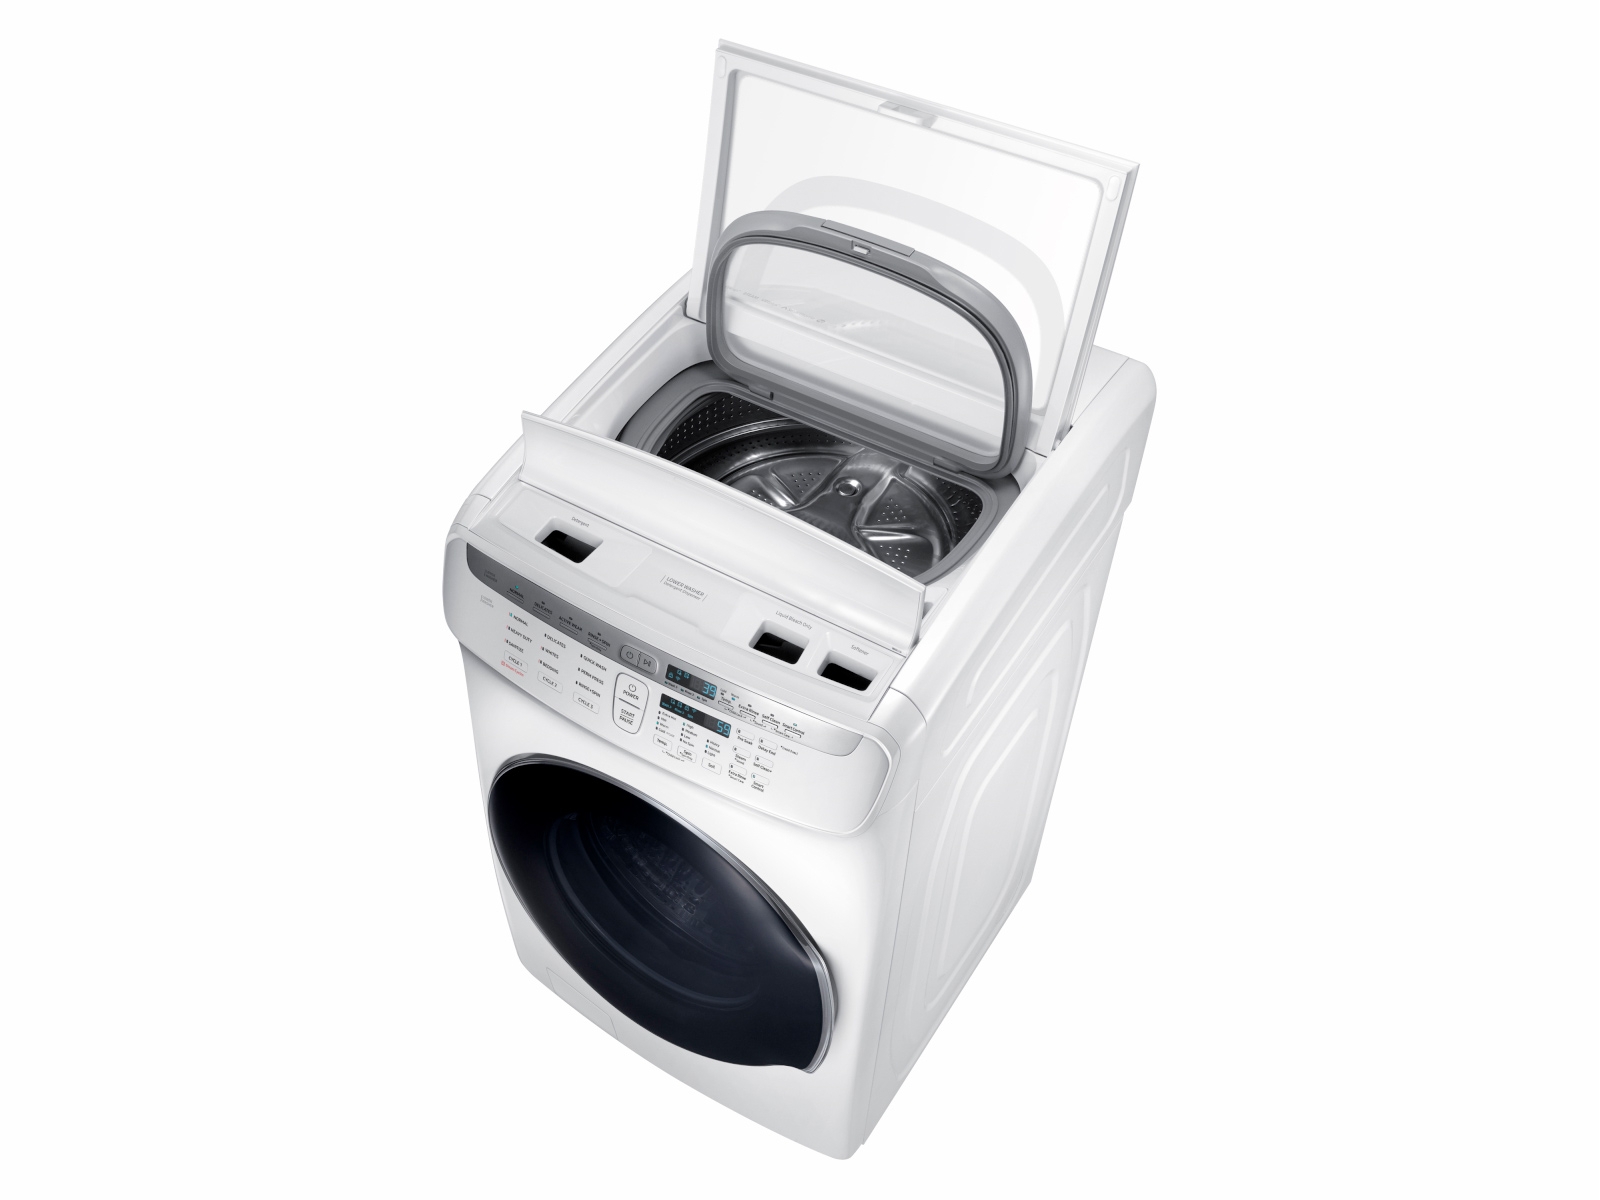 https://image-us.samsung.com/SamsungUS/home/home-appliances/washers/2-in-1/pd/wv55m9600aw/gallery/05_Washer-FlexWash_WV55M9600AW_Top-View_Dynamic_Open_White.jpg?$product-details-jpg$